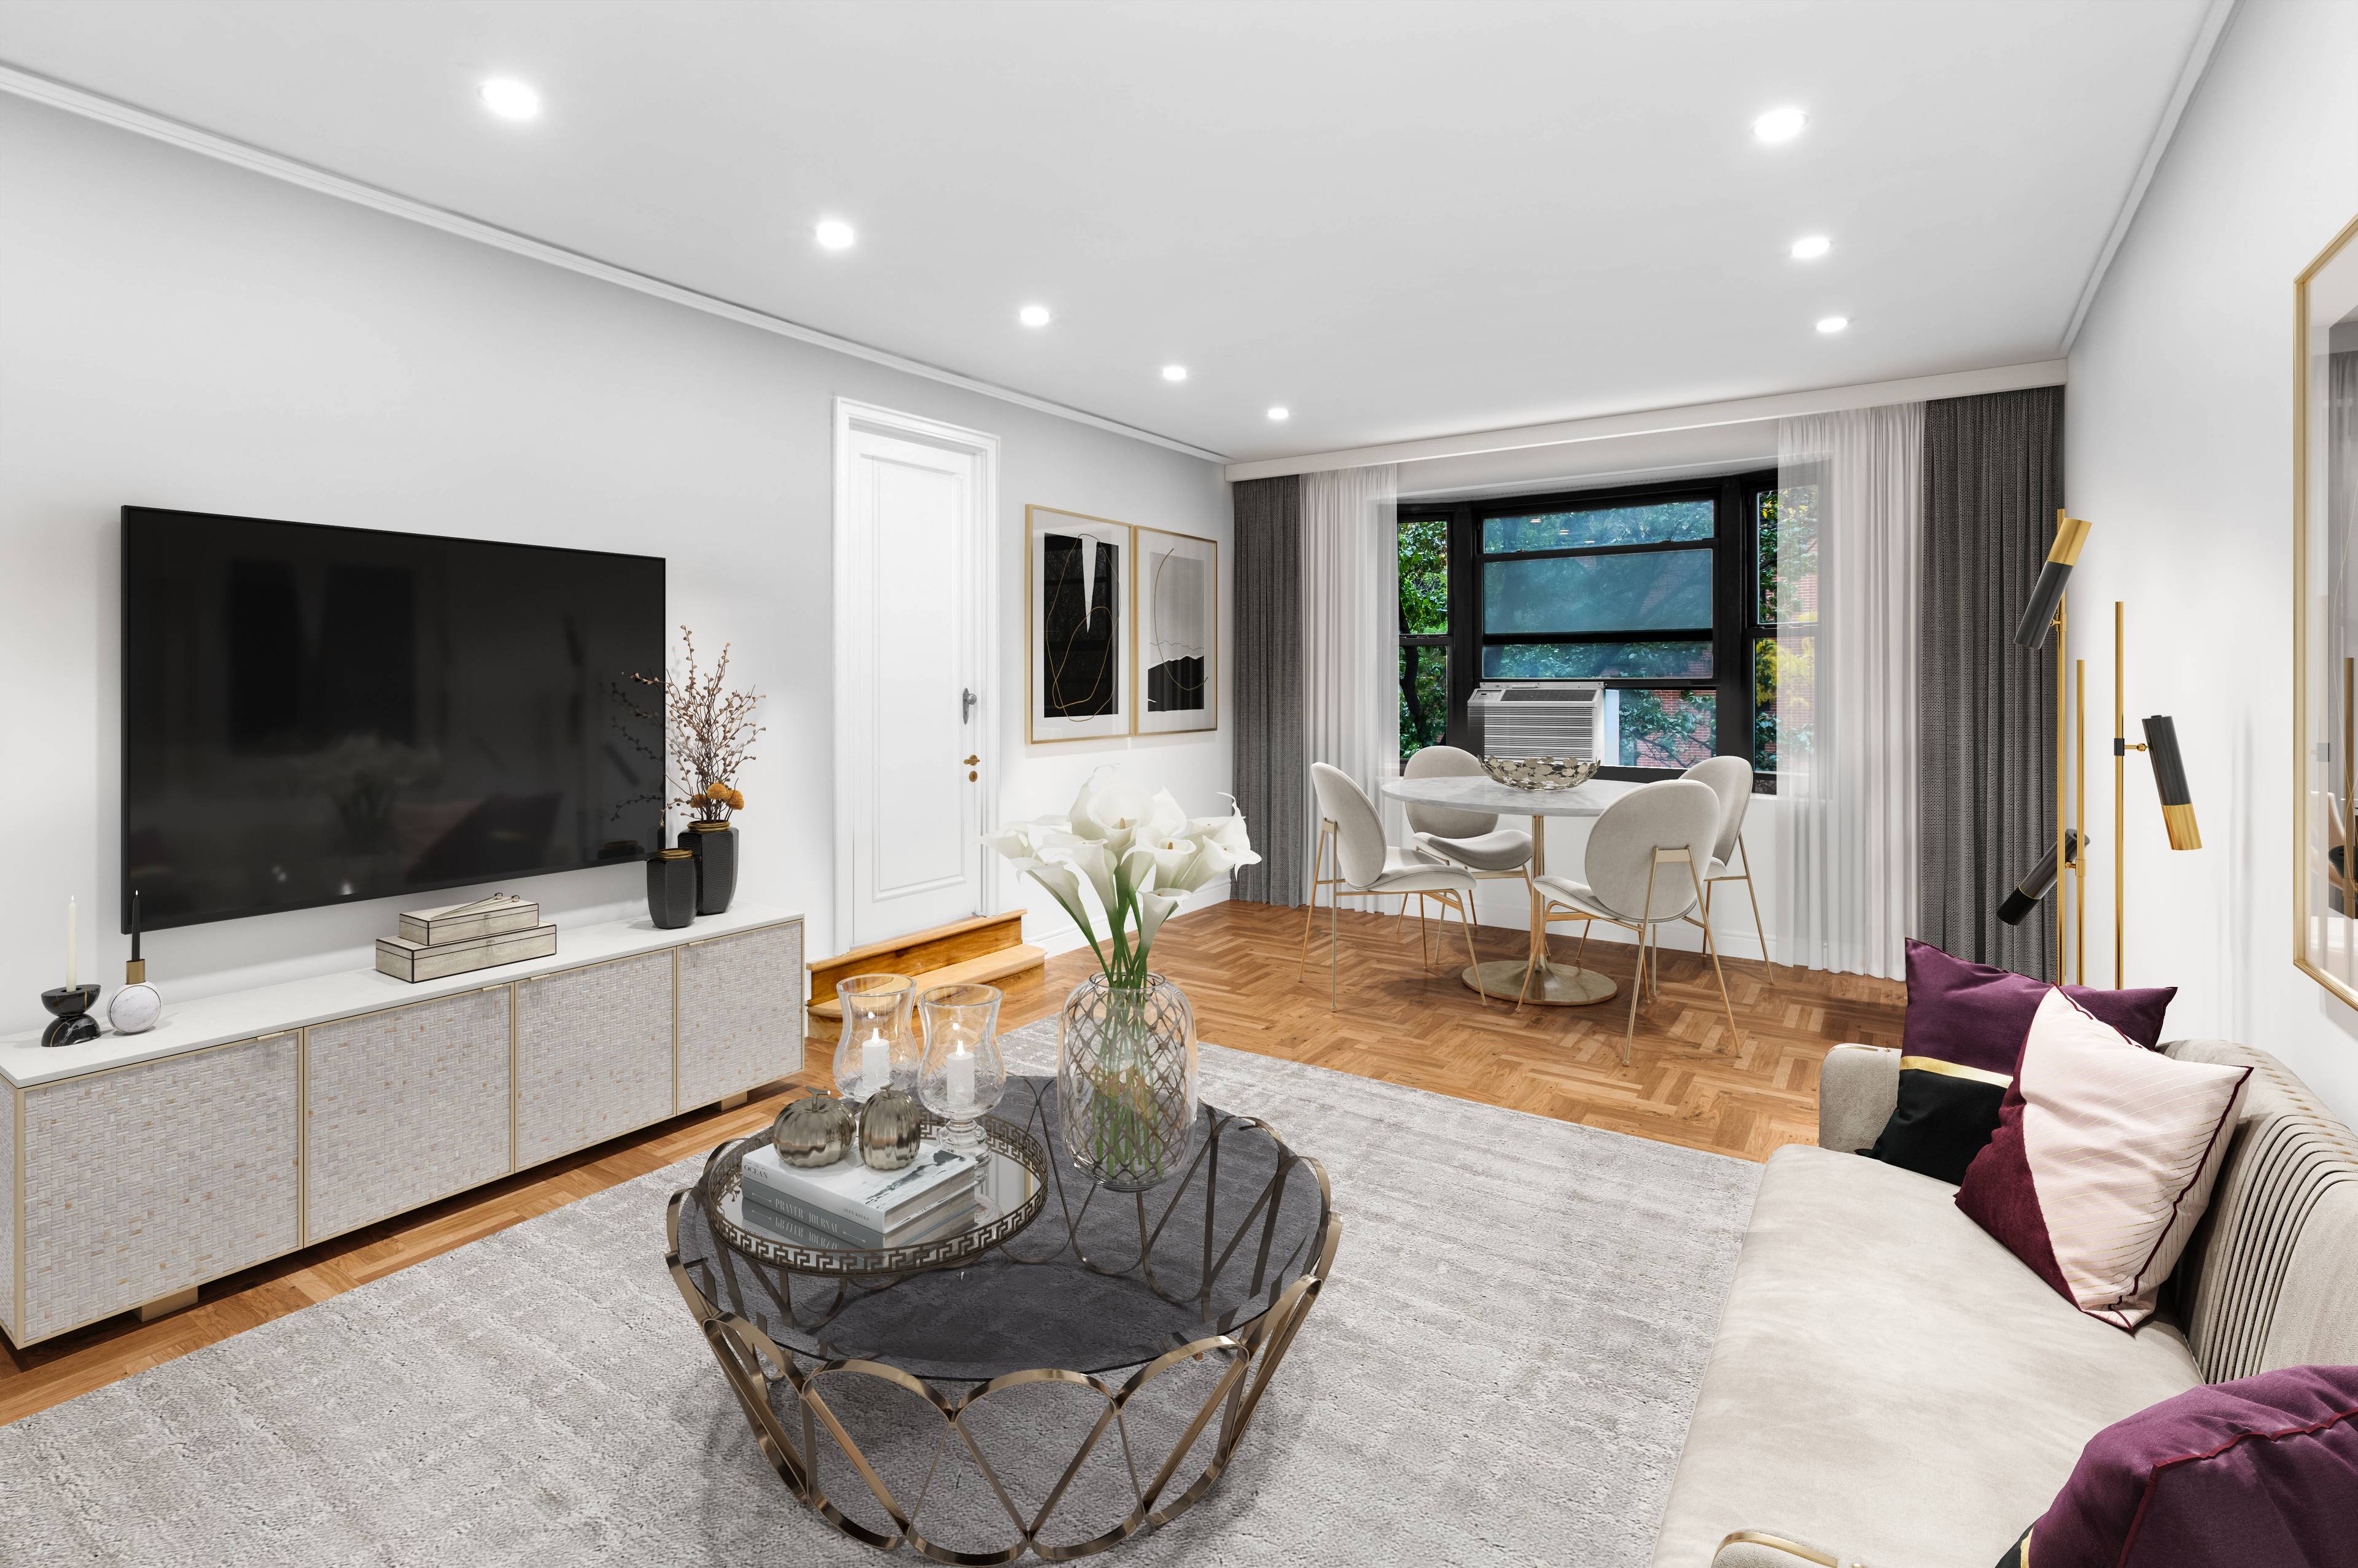 E 70s Charmer First OH Sunday 1 30 Beautifully Renovated 2BD 1BA with Brand New Hardwood Floors, Formal Foyer, Generous Layout, Oversized Windows, Window ACs in Every Room, Gracious Closets ...